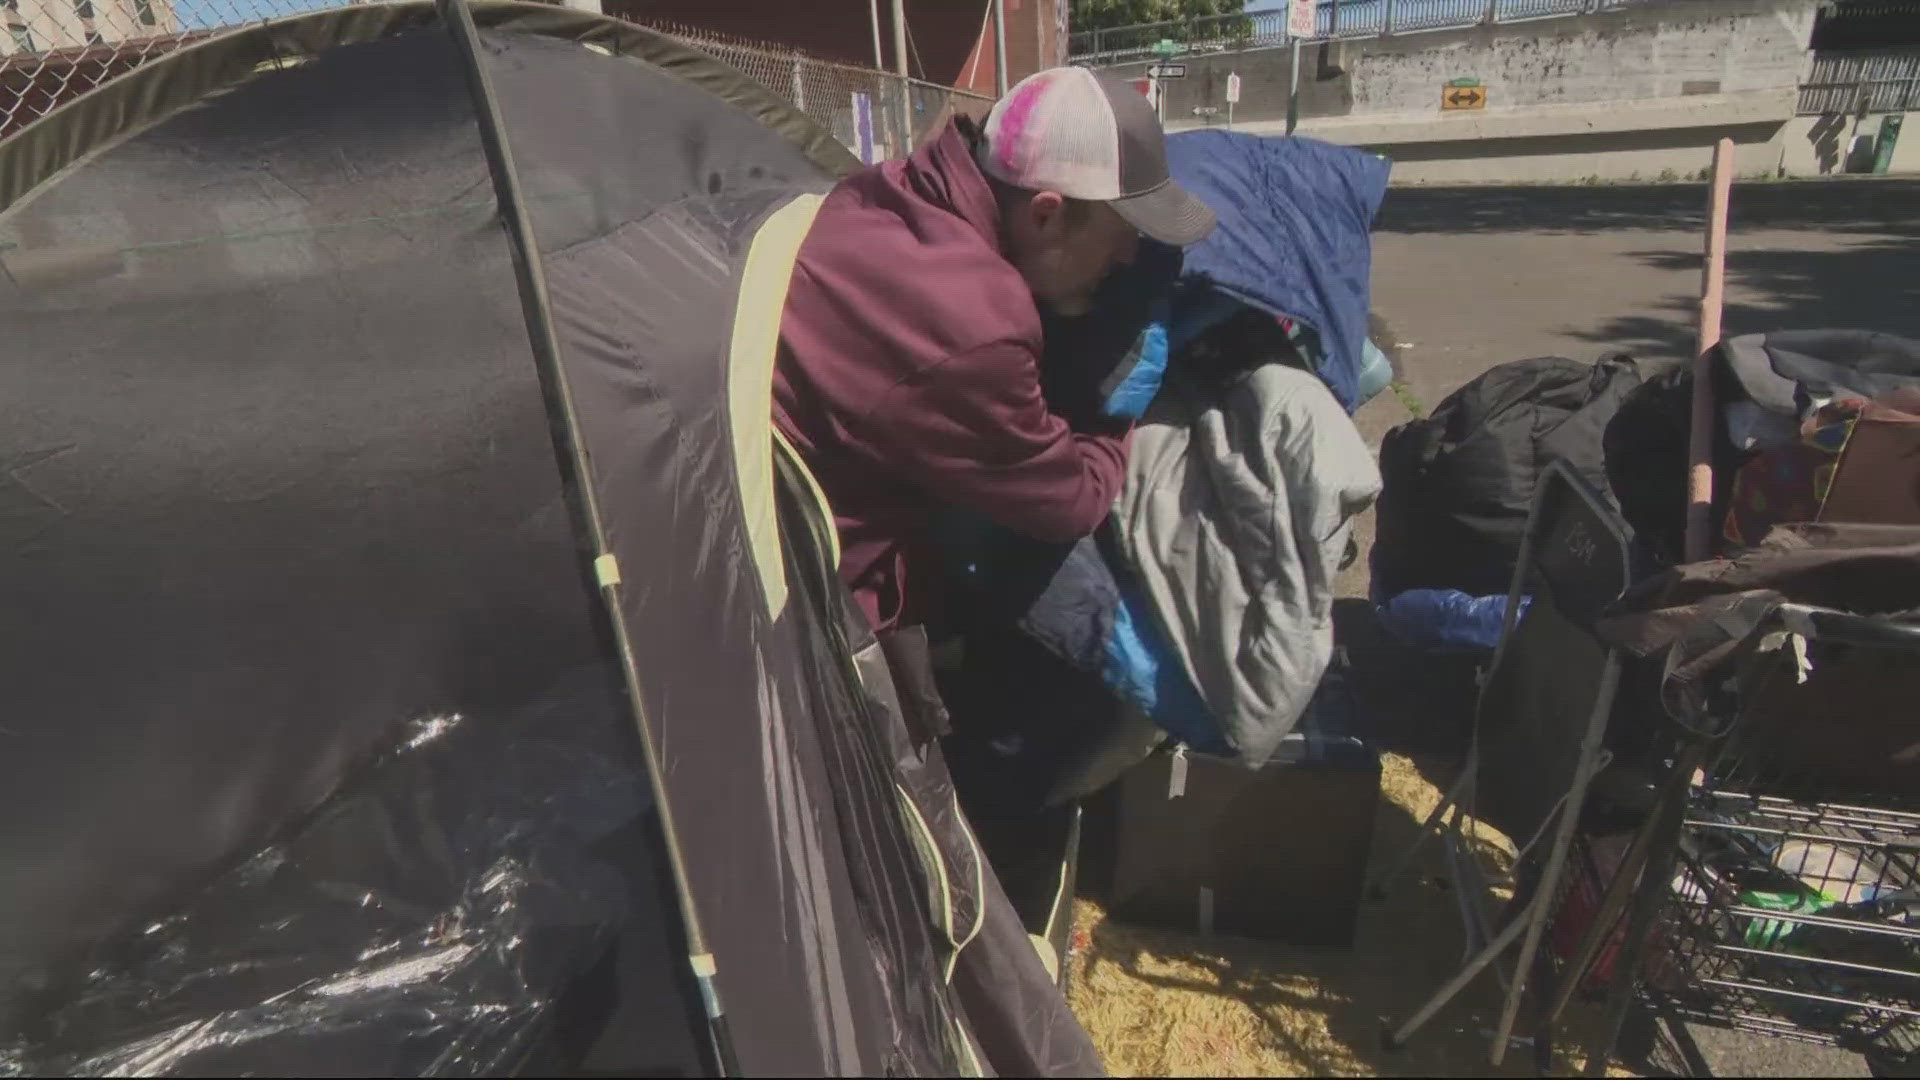 Portland City Council on Wednesday unanimously passed a new homeless camping ban designed this time to survive a court challenge.